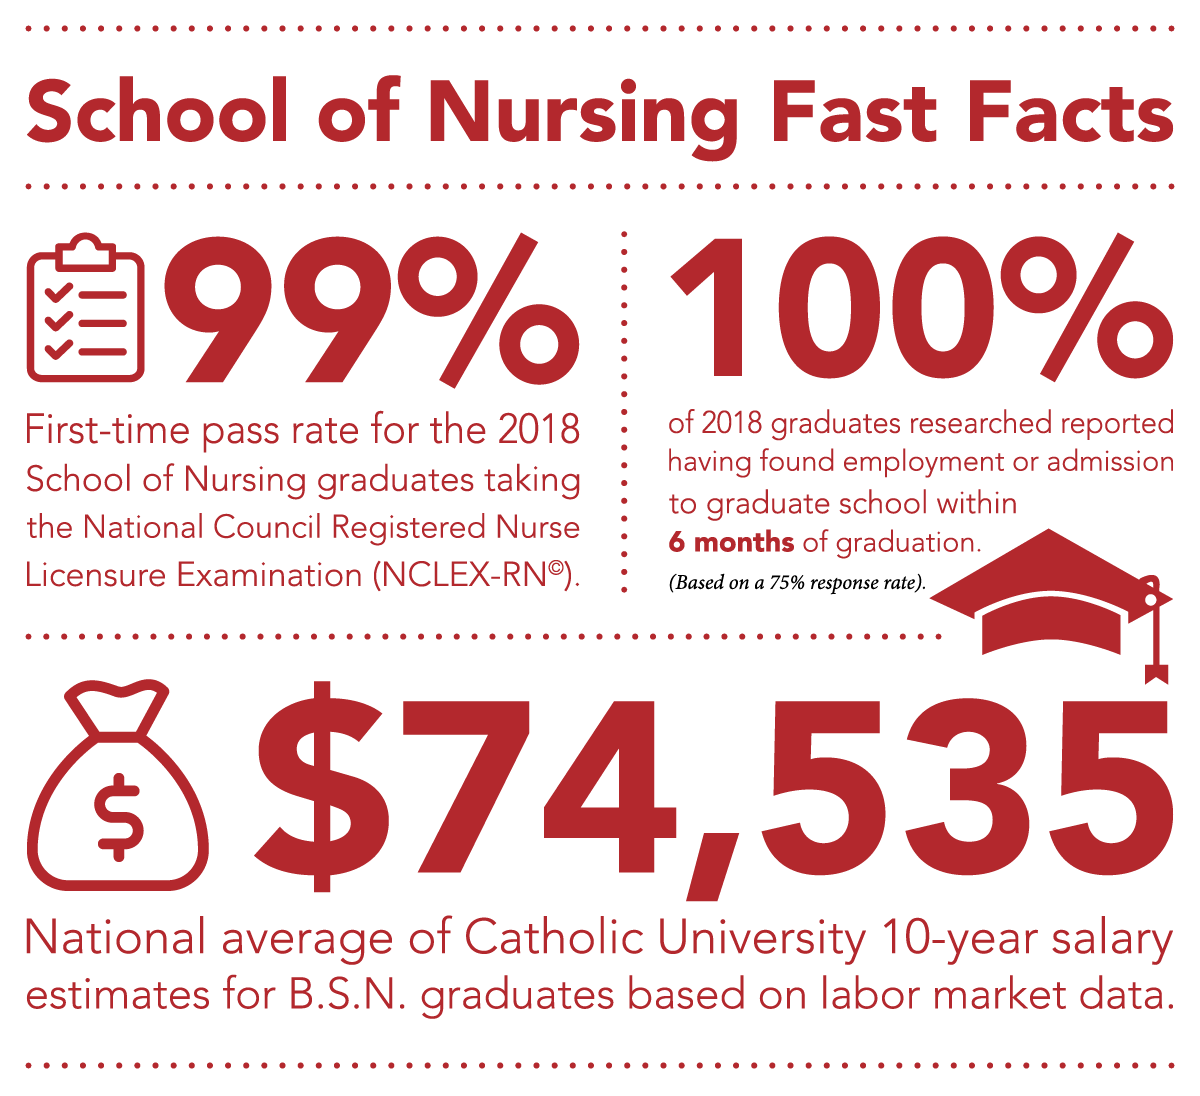 School of Nursing Fast Facts 99% First-time pass rate for the 2018 School of Nursing graduates taking the National Council Registered Nurse Licensure Examination (NCLEX-RN). 100% of 2018 graduates researched reported having found employment or admission to graduate school within 6 months of graduation (Based on a 75% response rate). $74,535 is the National Average of Catholic University 10-year salary estimates for B.S.N. graduates based on labor market data. 